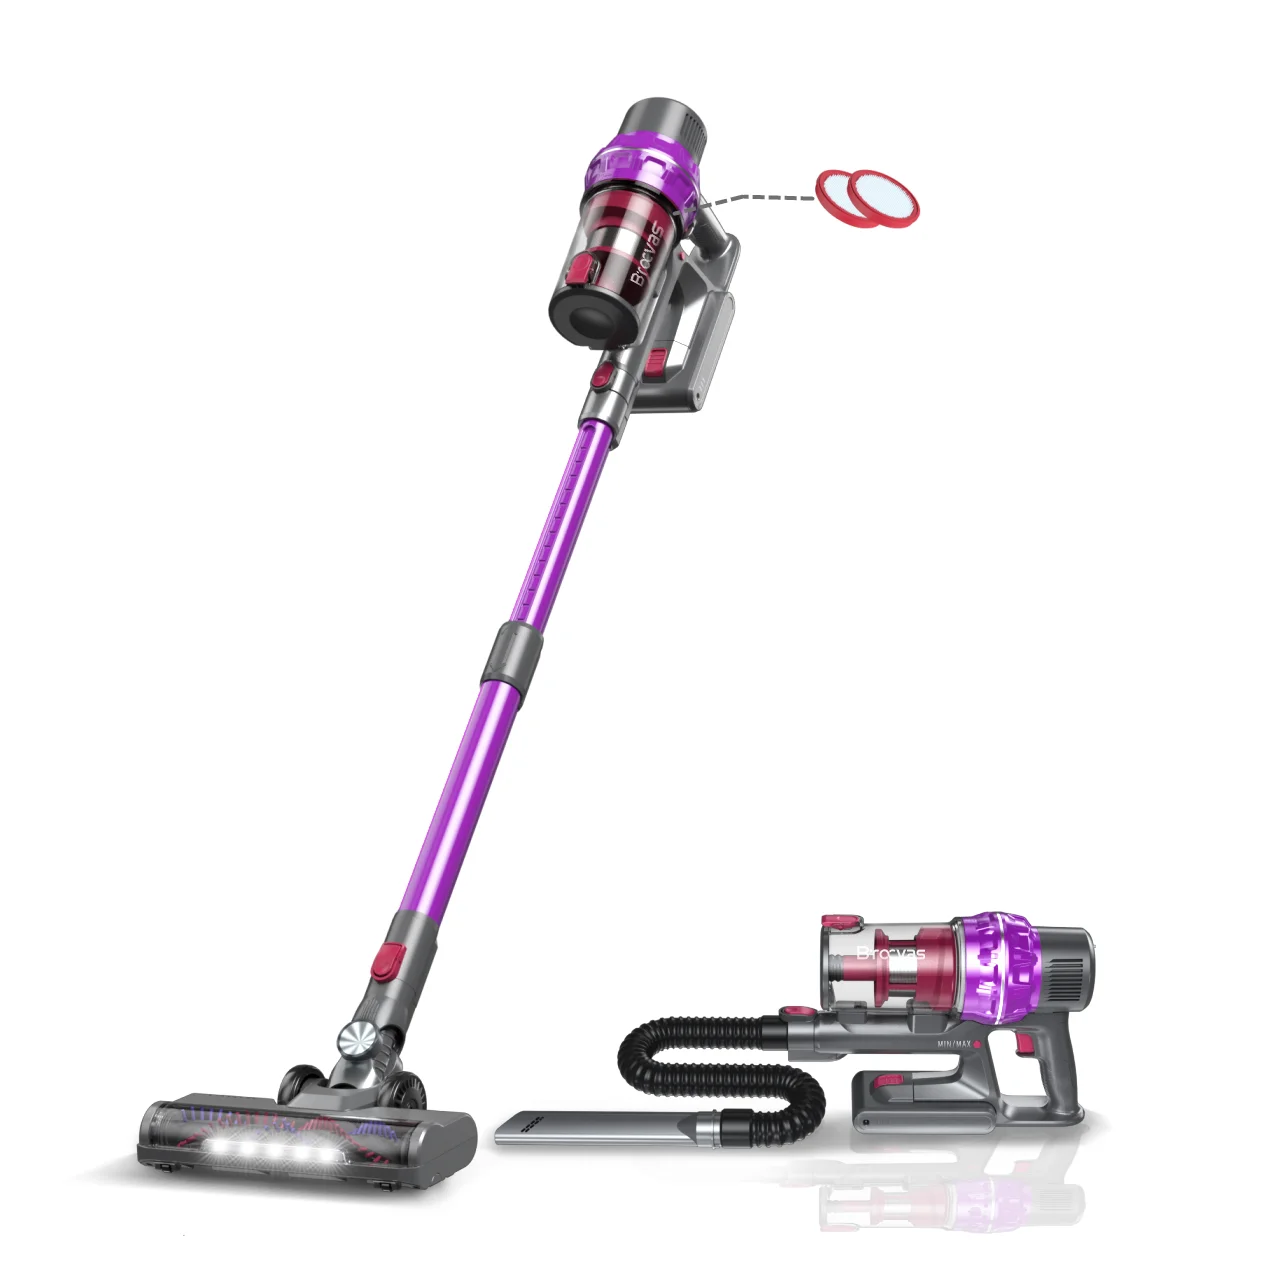 

3 In 1 Stick Hand Held Foldable LED Headlights Vacuum Detachable Battery Vacuum Cleaner Dual Motor Hoover Supplier